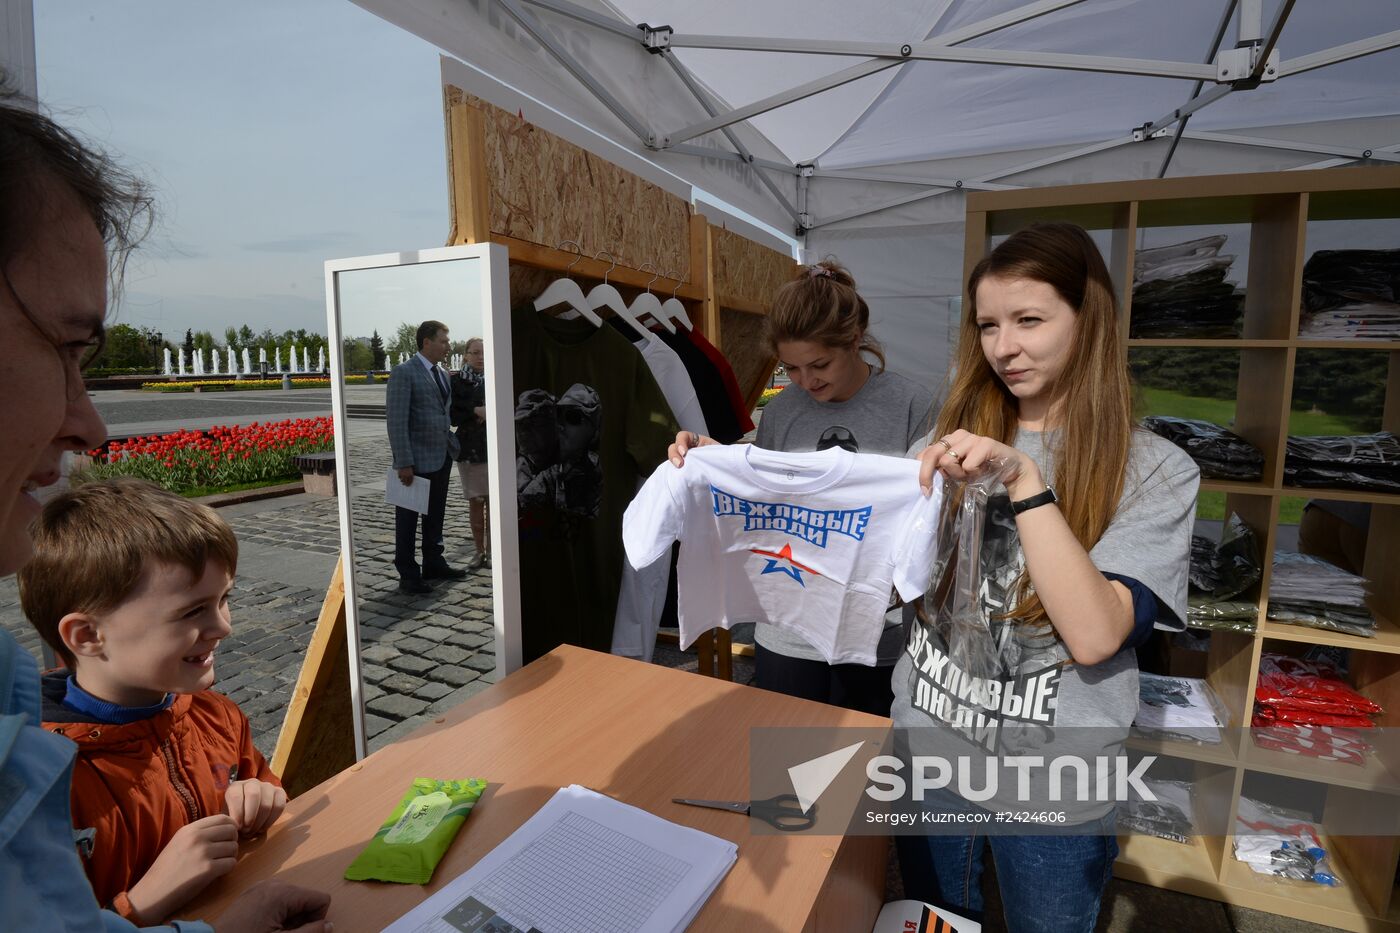 Russian Defense Ministry launches "Russia's Army and "Polite People" brands